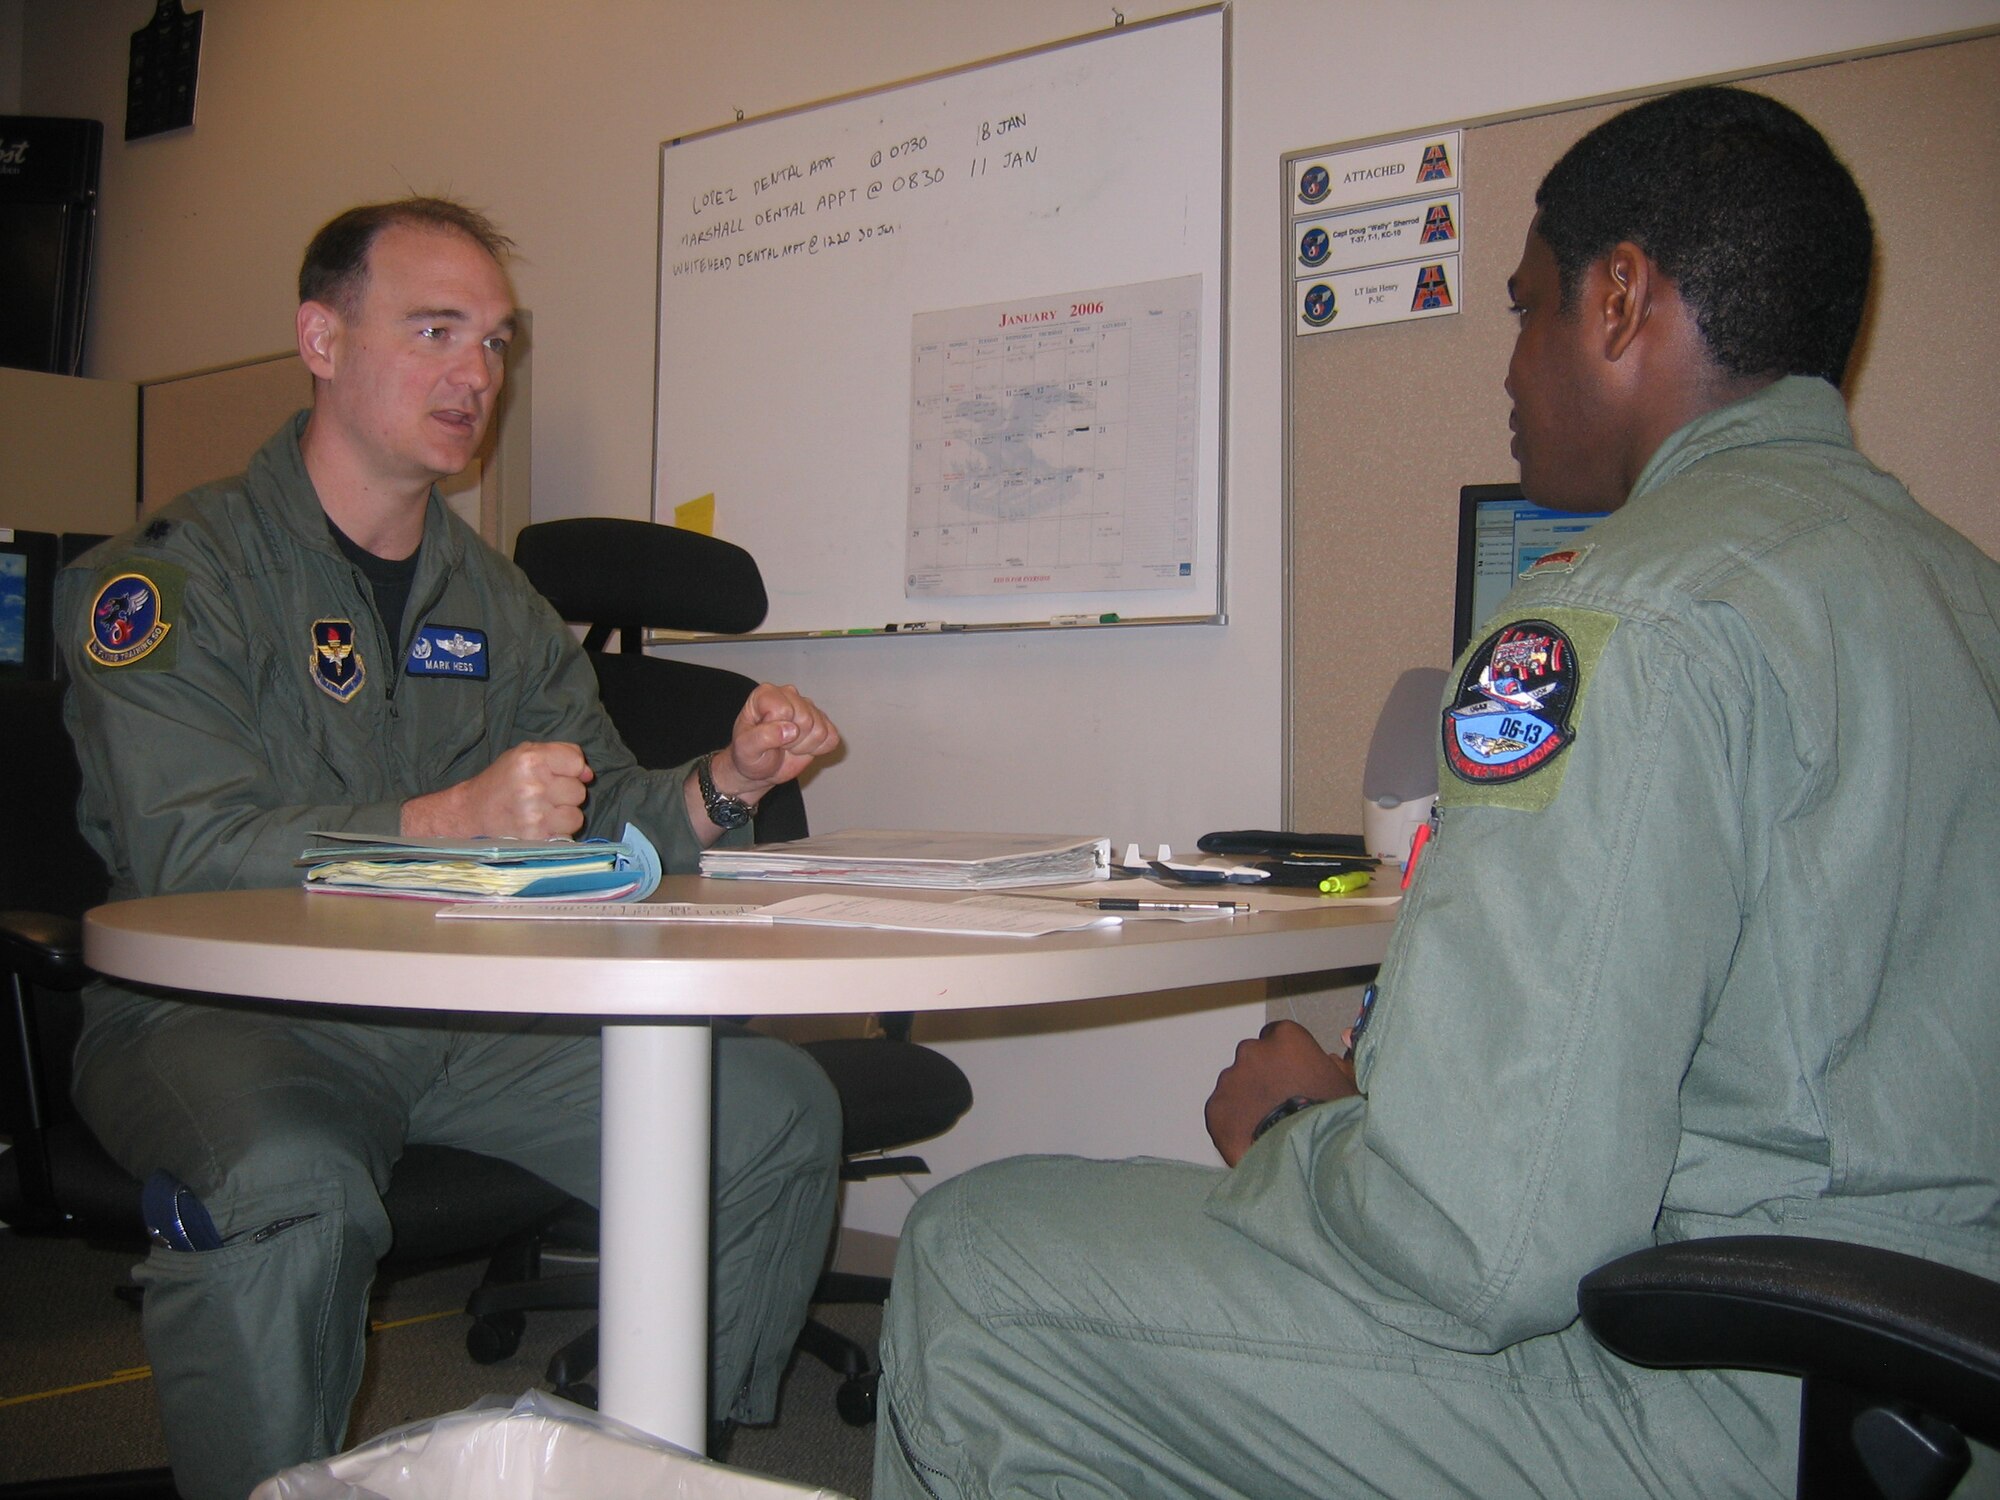 MOODY AIR FORCE BASE, Ga. - Lt. Col. Mark Hess, 3rd Flying Training Squadron commander, briefs 2nd Lt. Paul Lopez prior to a flight Jan. 17. Colonel Hess made history Jan. 19 by becoming the first Air Education and Training Command squadron commander to attain 1,000 flying hours in the T-6A Texan II. (Photo by Senior Airman S.I. Fielder)